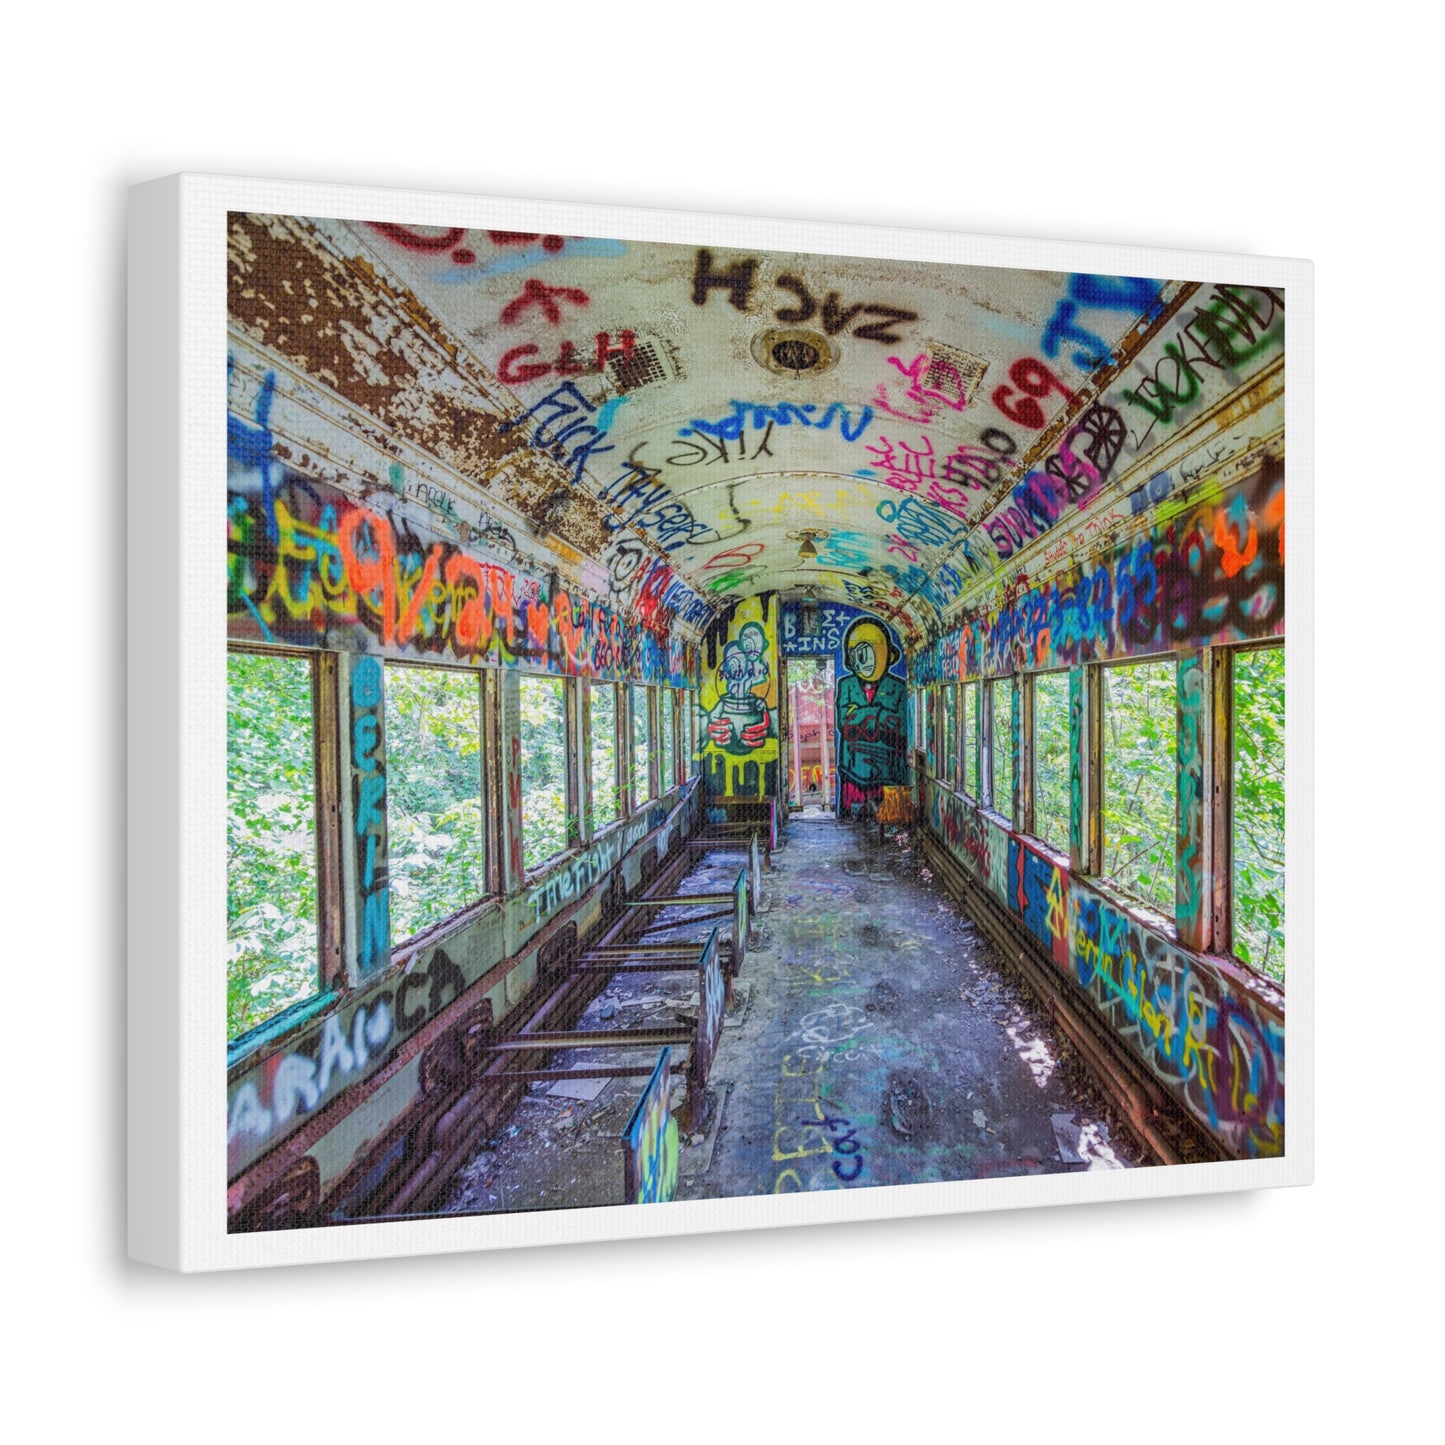 Abandoned Passenger Train Car in Lambertville, New Jersey, Art Print from the Original on Canvas